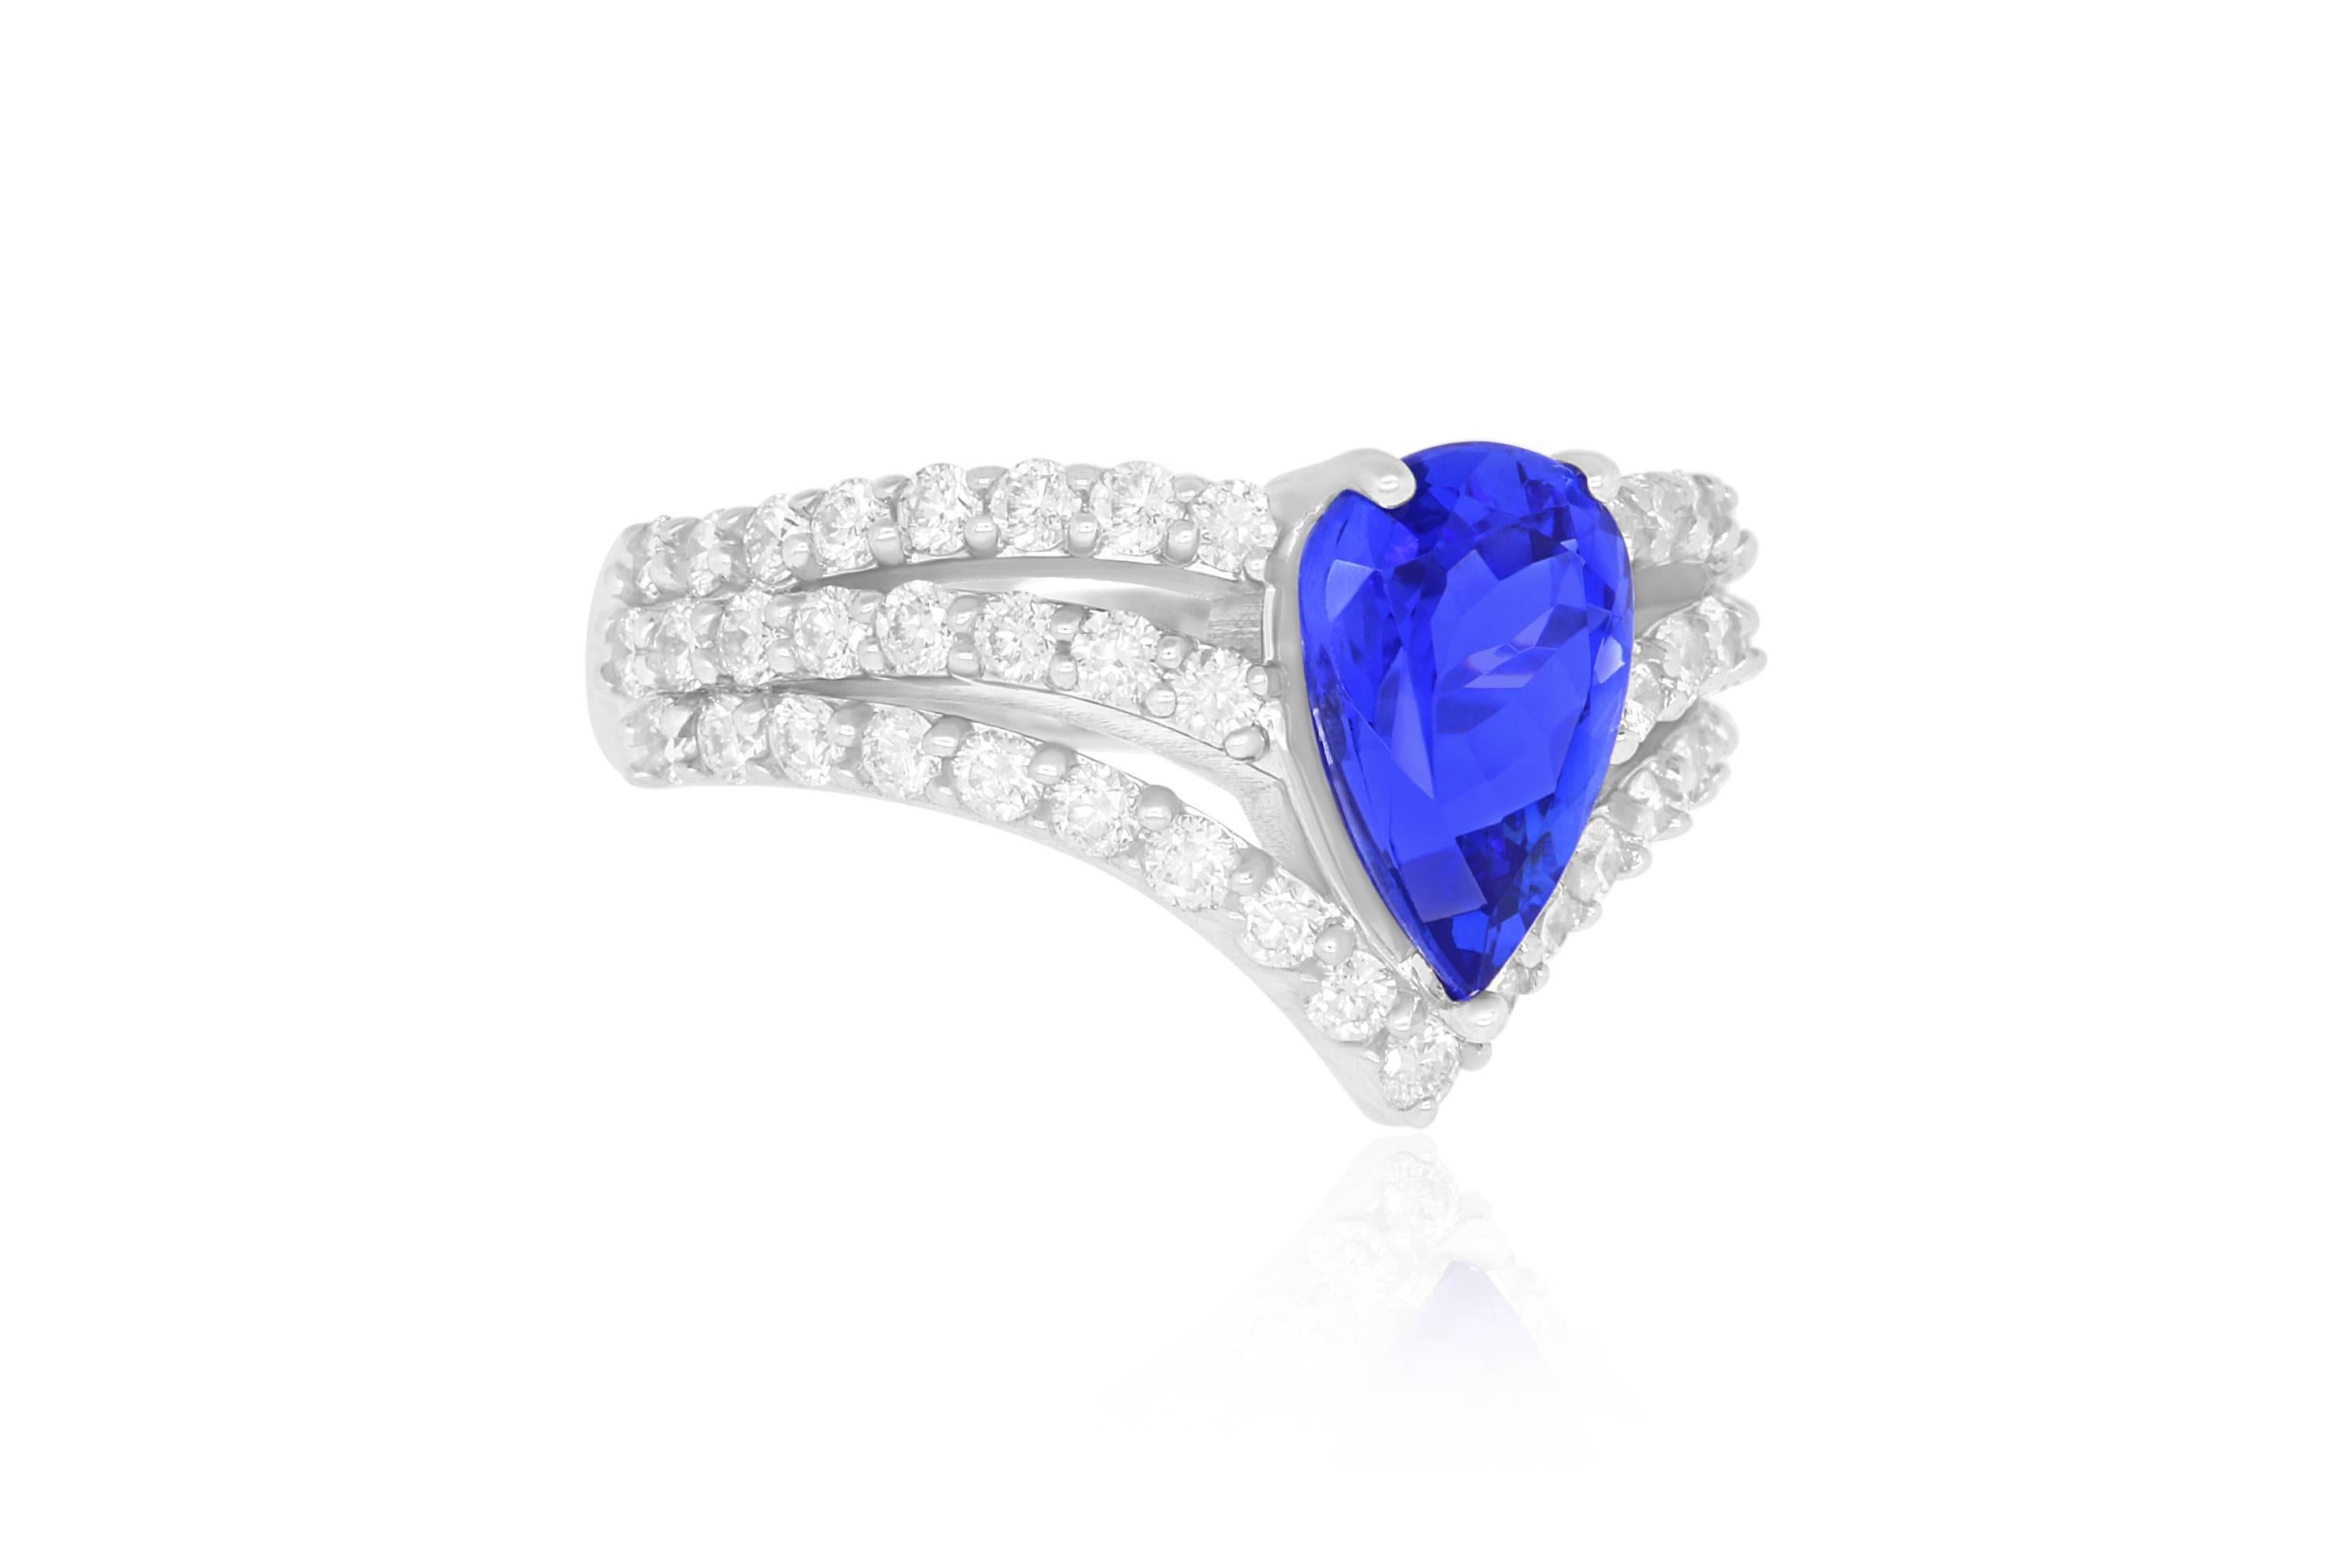 14k White Gold
Center Stone: 1 Tanzanite at 1.93 carats
Diamonds: 51 Brilliant White Round Diamonds at 0.95 carats - Color: HI - Clarity: SI
Ring Size: Size 6.5. Alberto offers complimentary sizing on all rings.

Fine one-of-a-kind craftsmanship